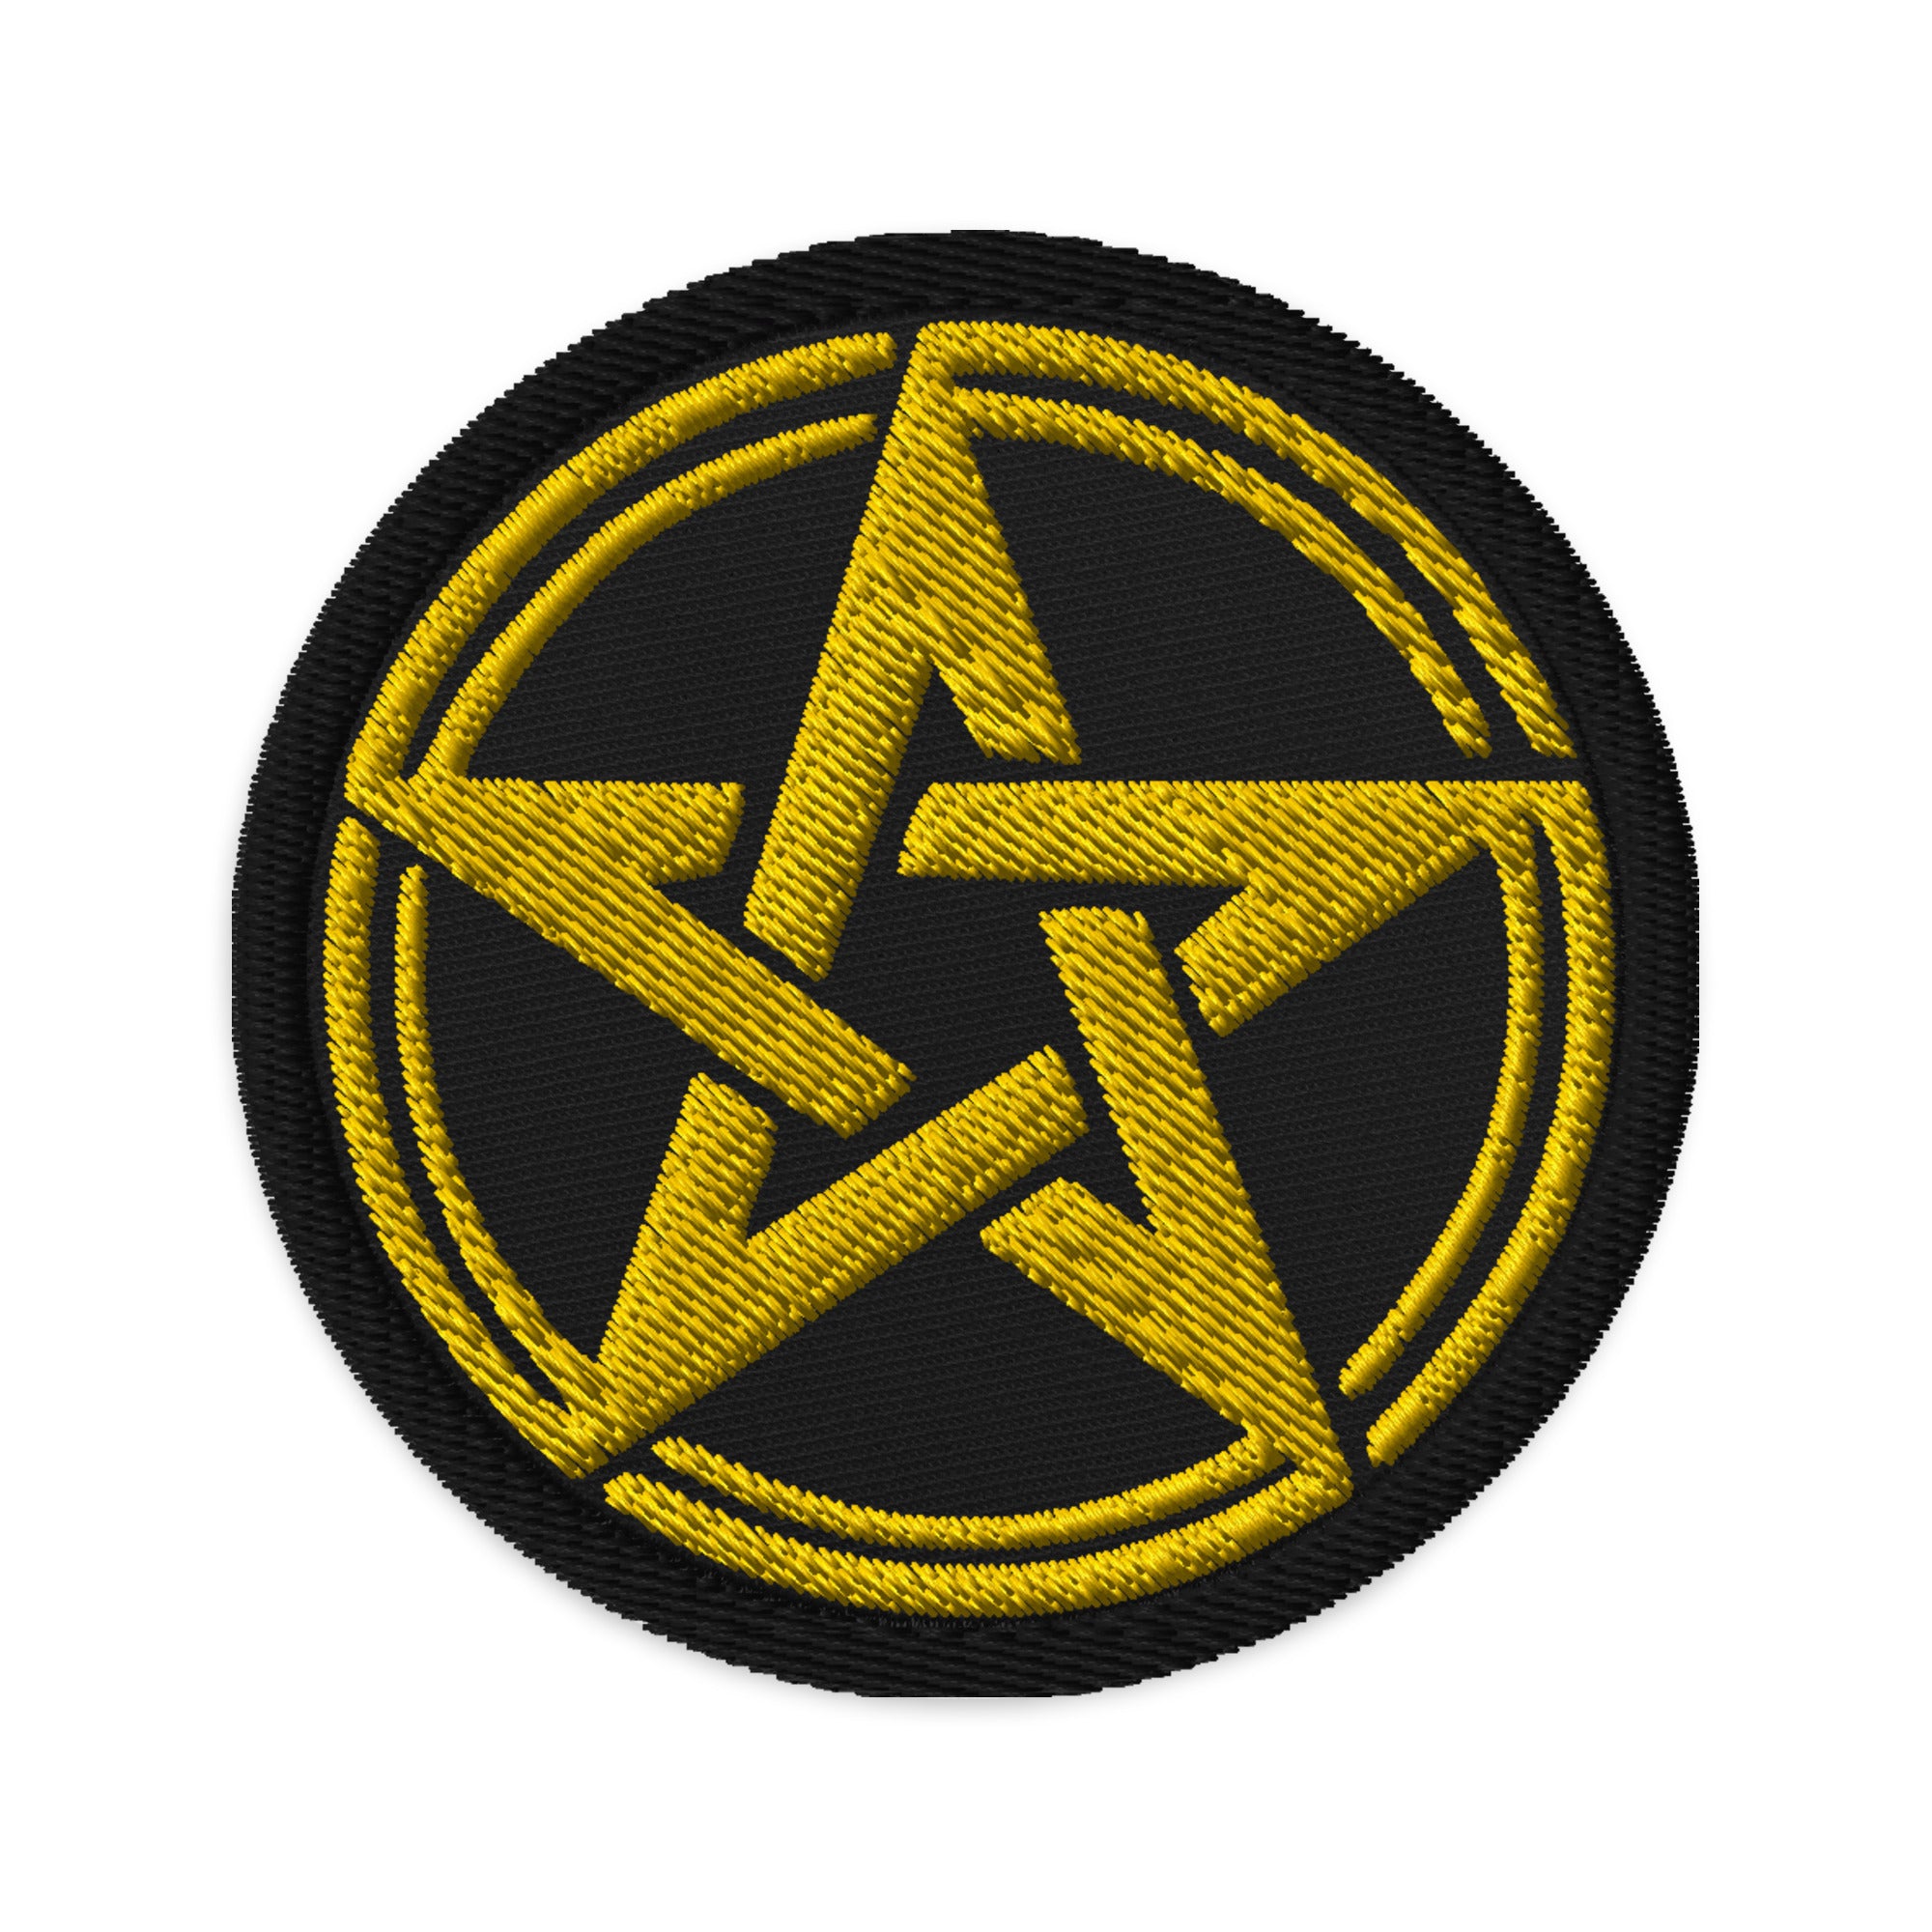 The Witching Hour Woven Pentagram Embroidered Patch Wiccan Ritual - Edge of Life Designs